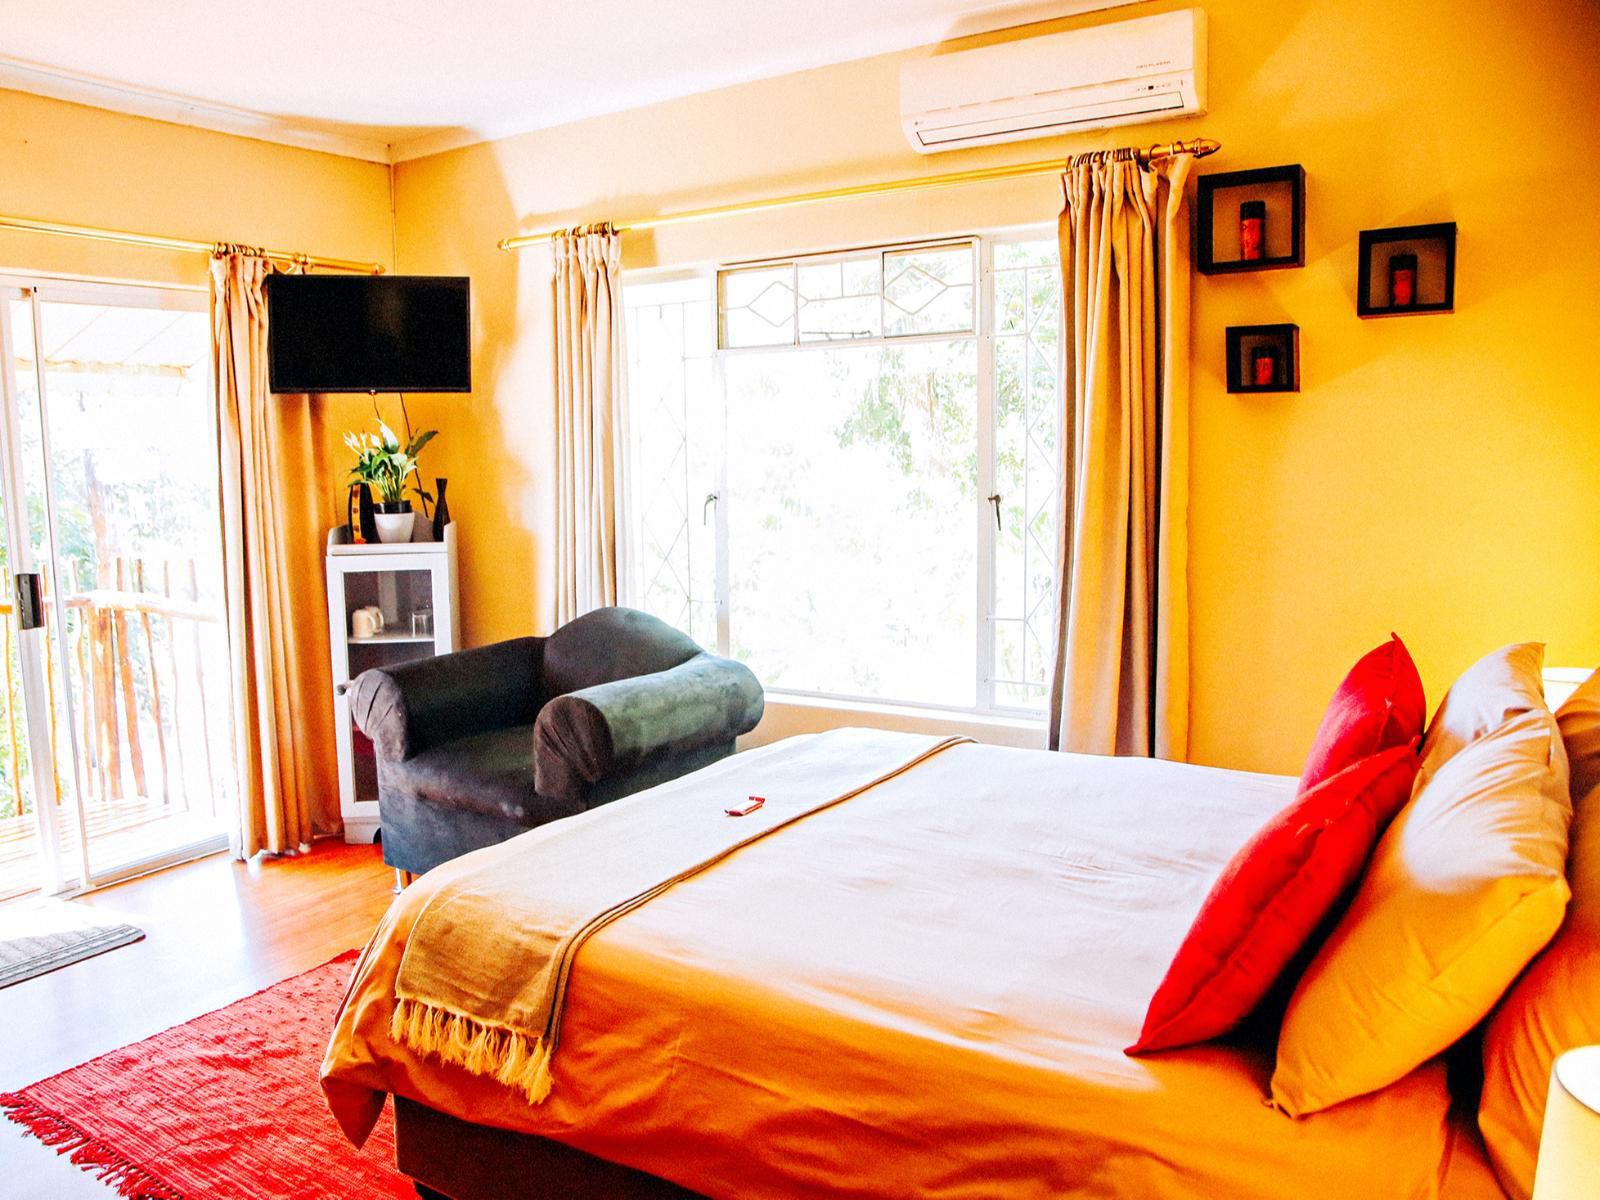 Maroela Guest Lodge Thabazimbi Limpopo Province South Africa Colorful, Bedroom